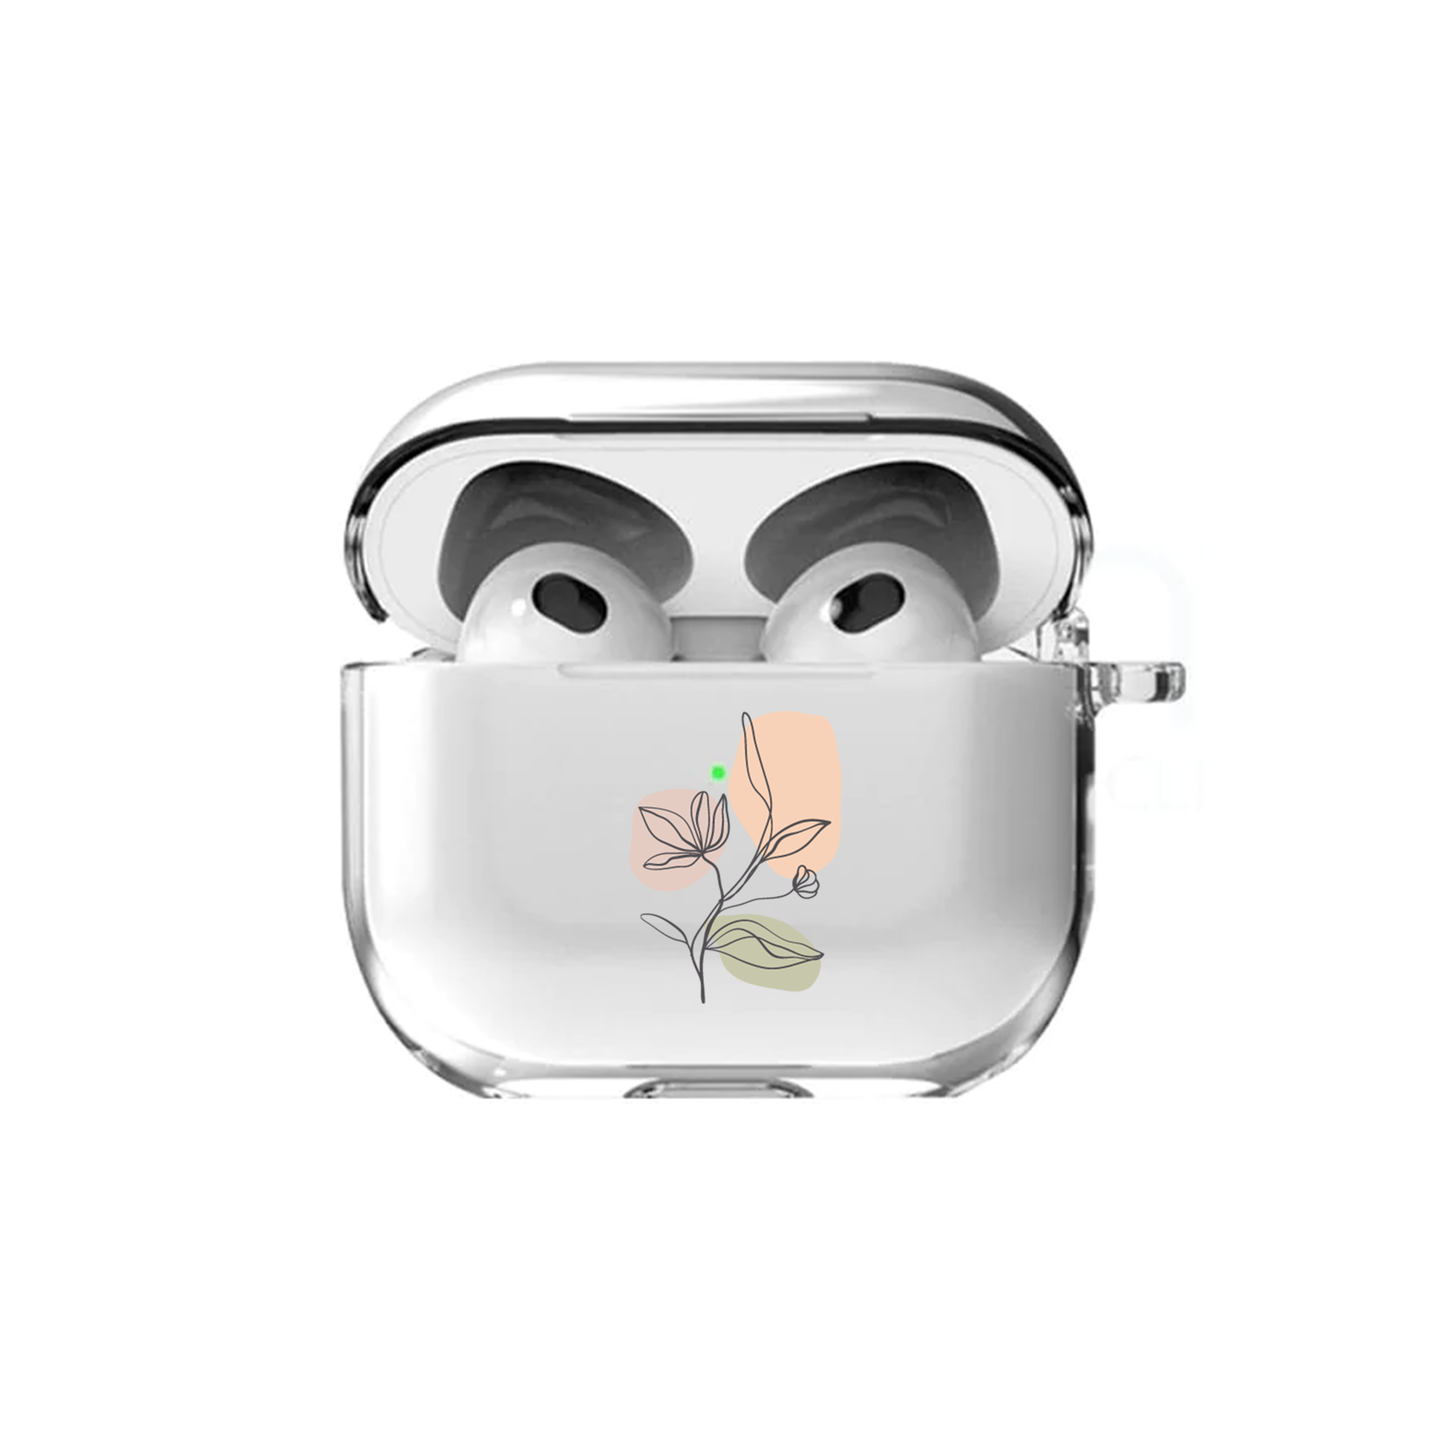 Airpods Case - Sketchy Flower